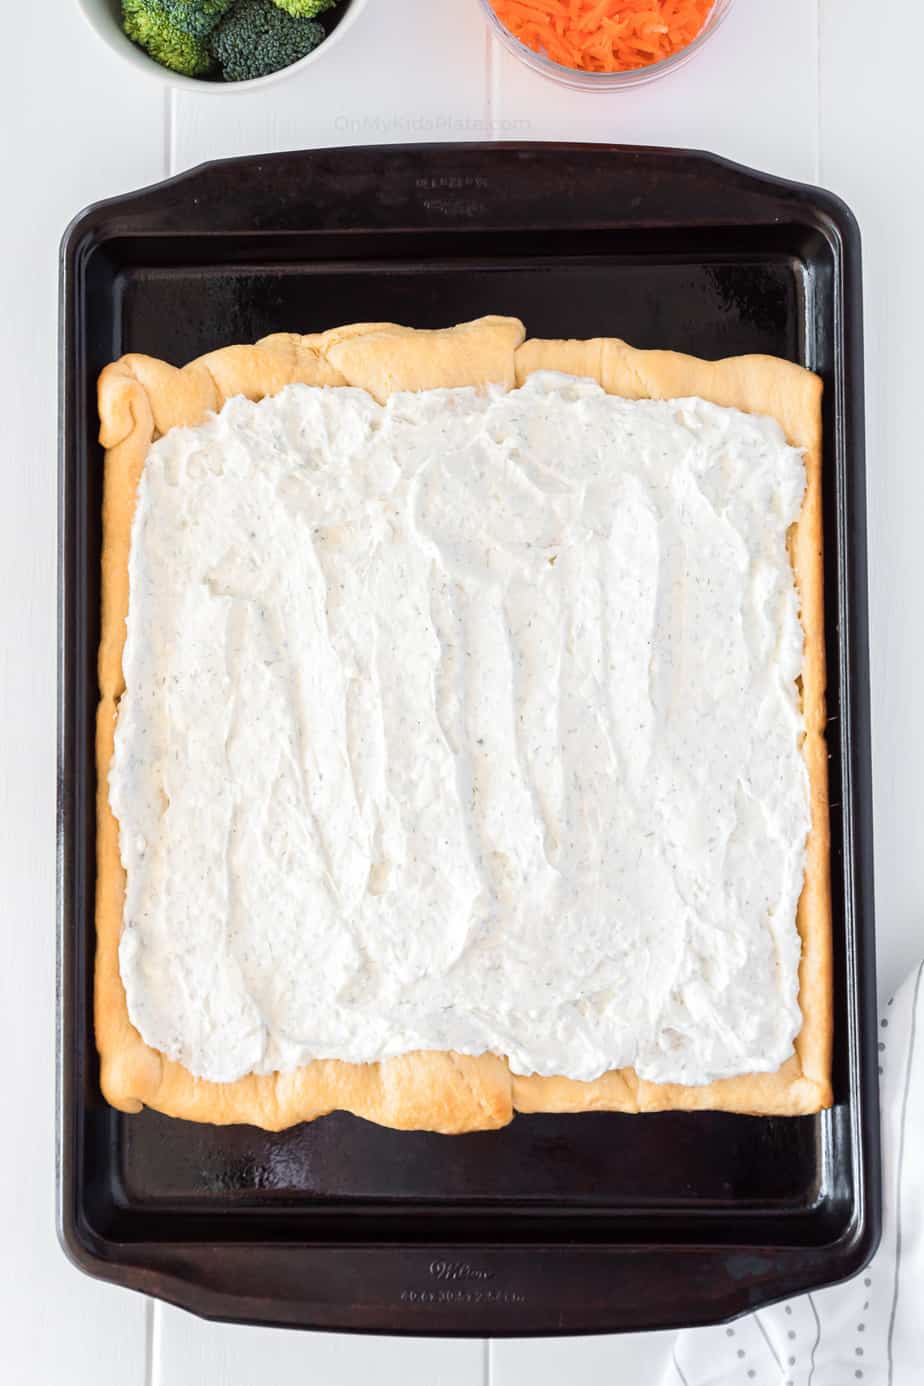 Flavored cream cheese spread onto crescent dough on a pan